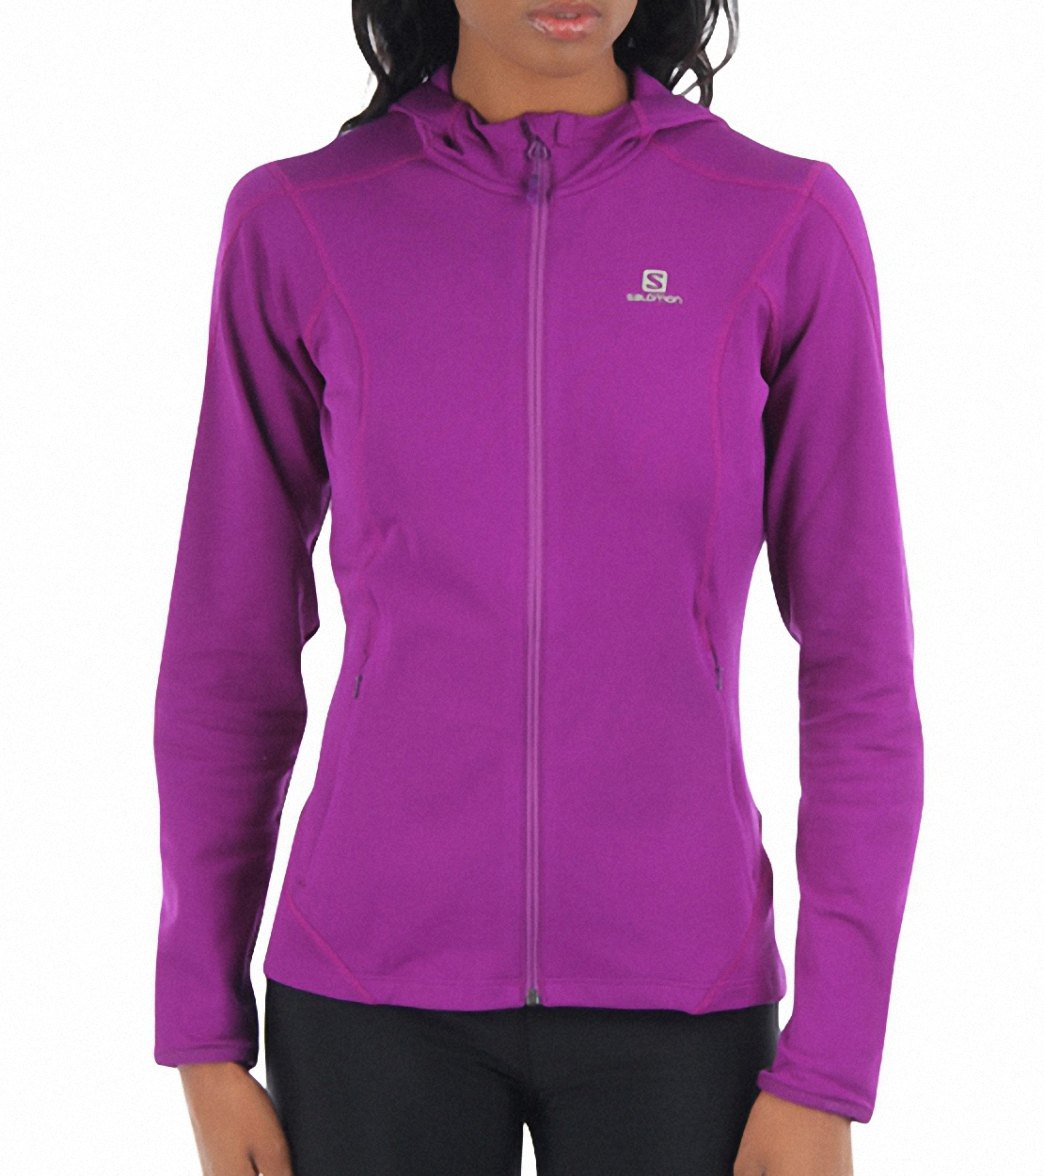 Salomon Women's Discovery Hooded Running Midlayer at SwimOutlet.com